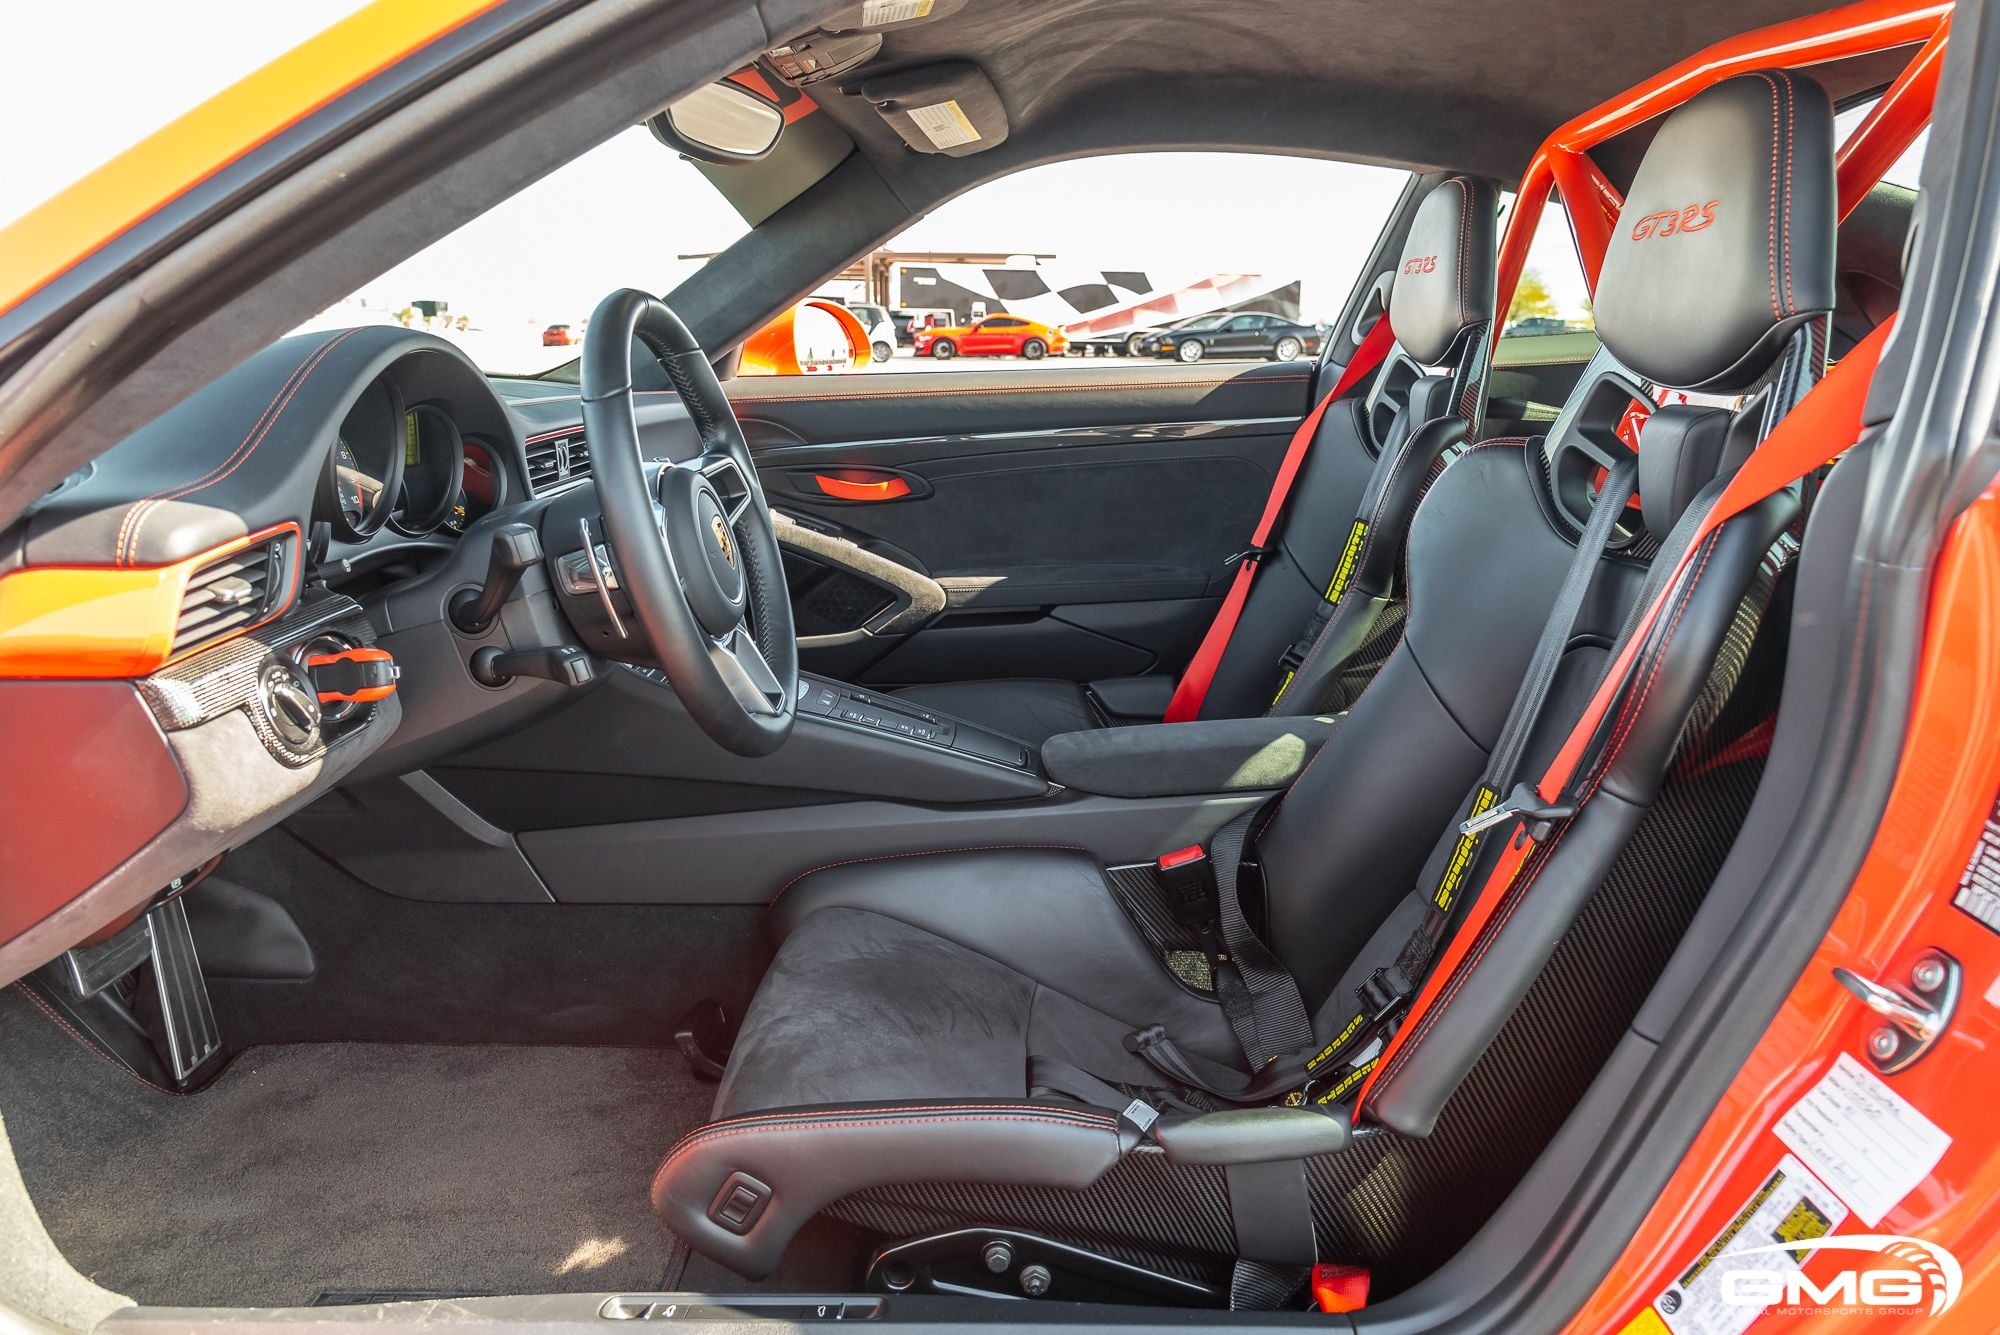 2016 Porsche GT3 - GMG Racing - Stunning Track Prepped Lava Orange 991.1 GT3 RS For Sale! - Used - VIN WP0AF2A98GS192150 - 5,400 Miles - 6 cyl - 2WD - Automatic - Coupe - Orange - Southern California, CA 92704, United States